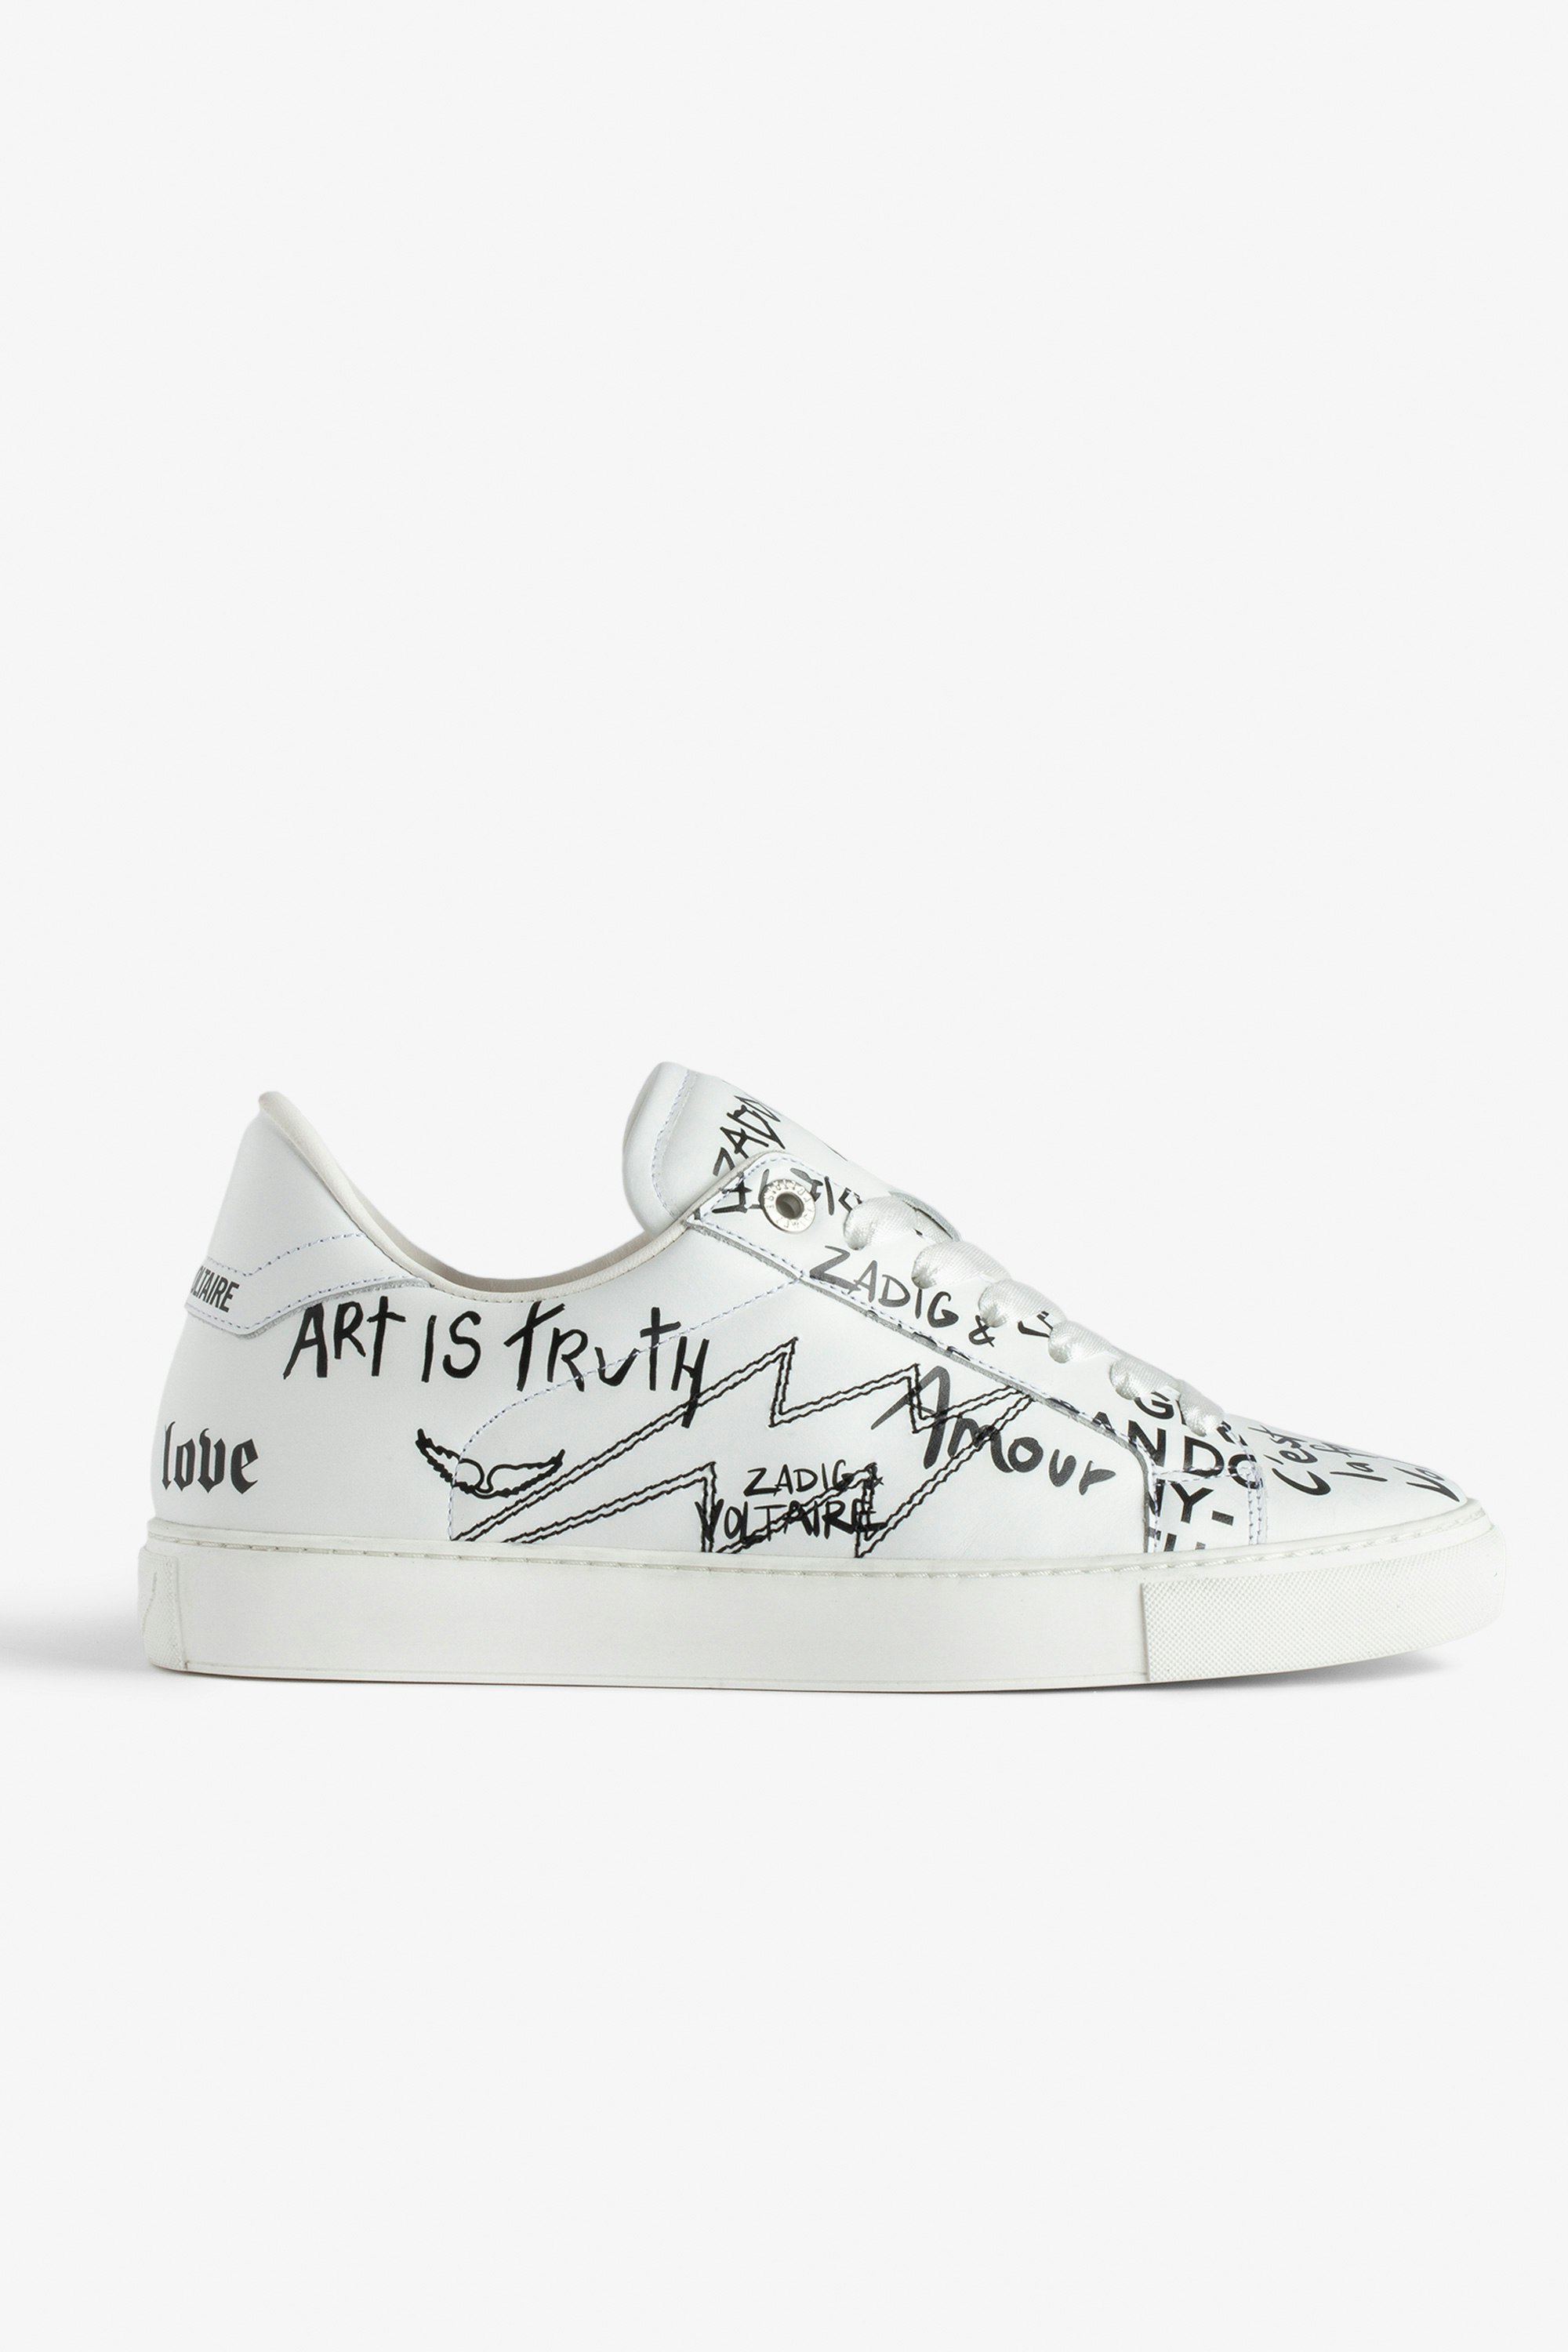 ZV1747 La Flash Low-Top Trainers Women’s white smooth leather low-top trainers with lightning bolt panels and graffiti.